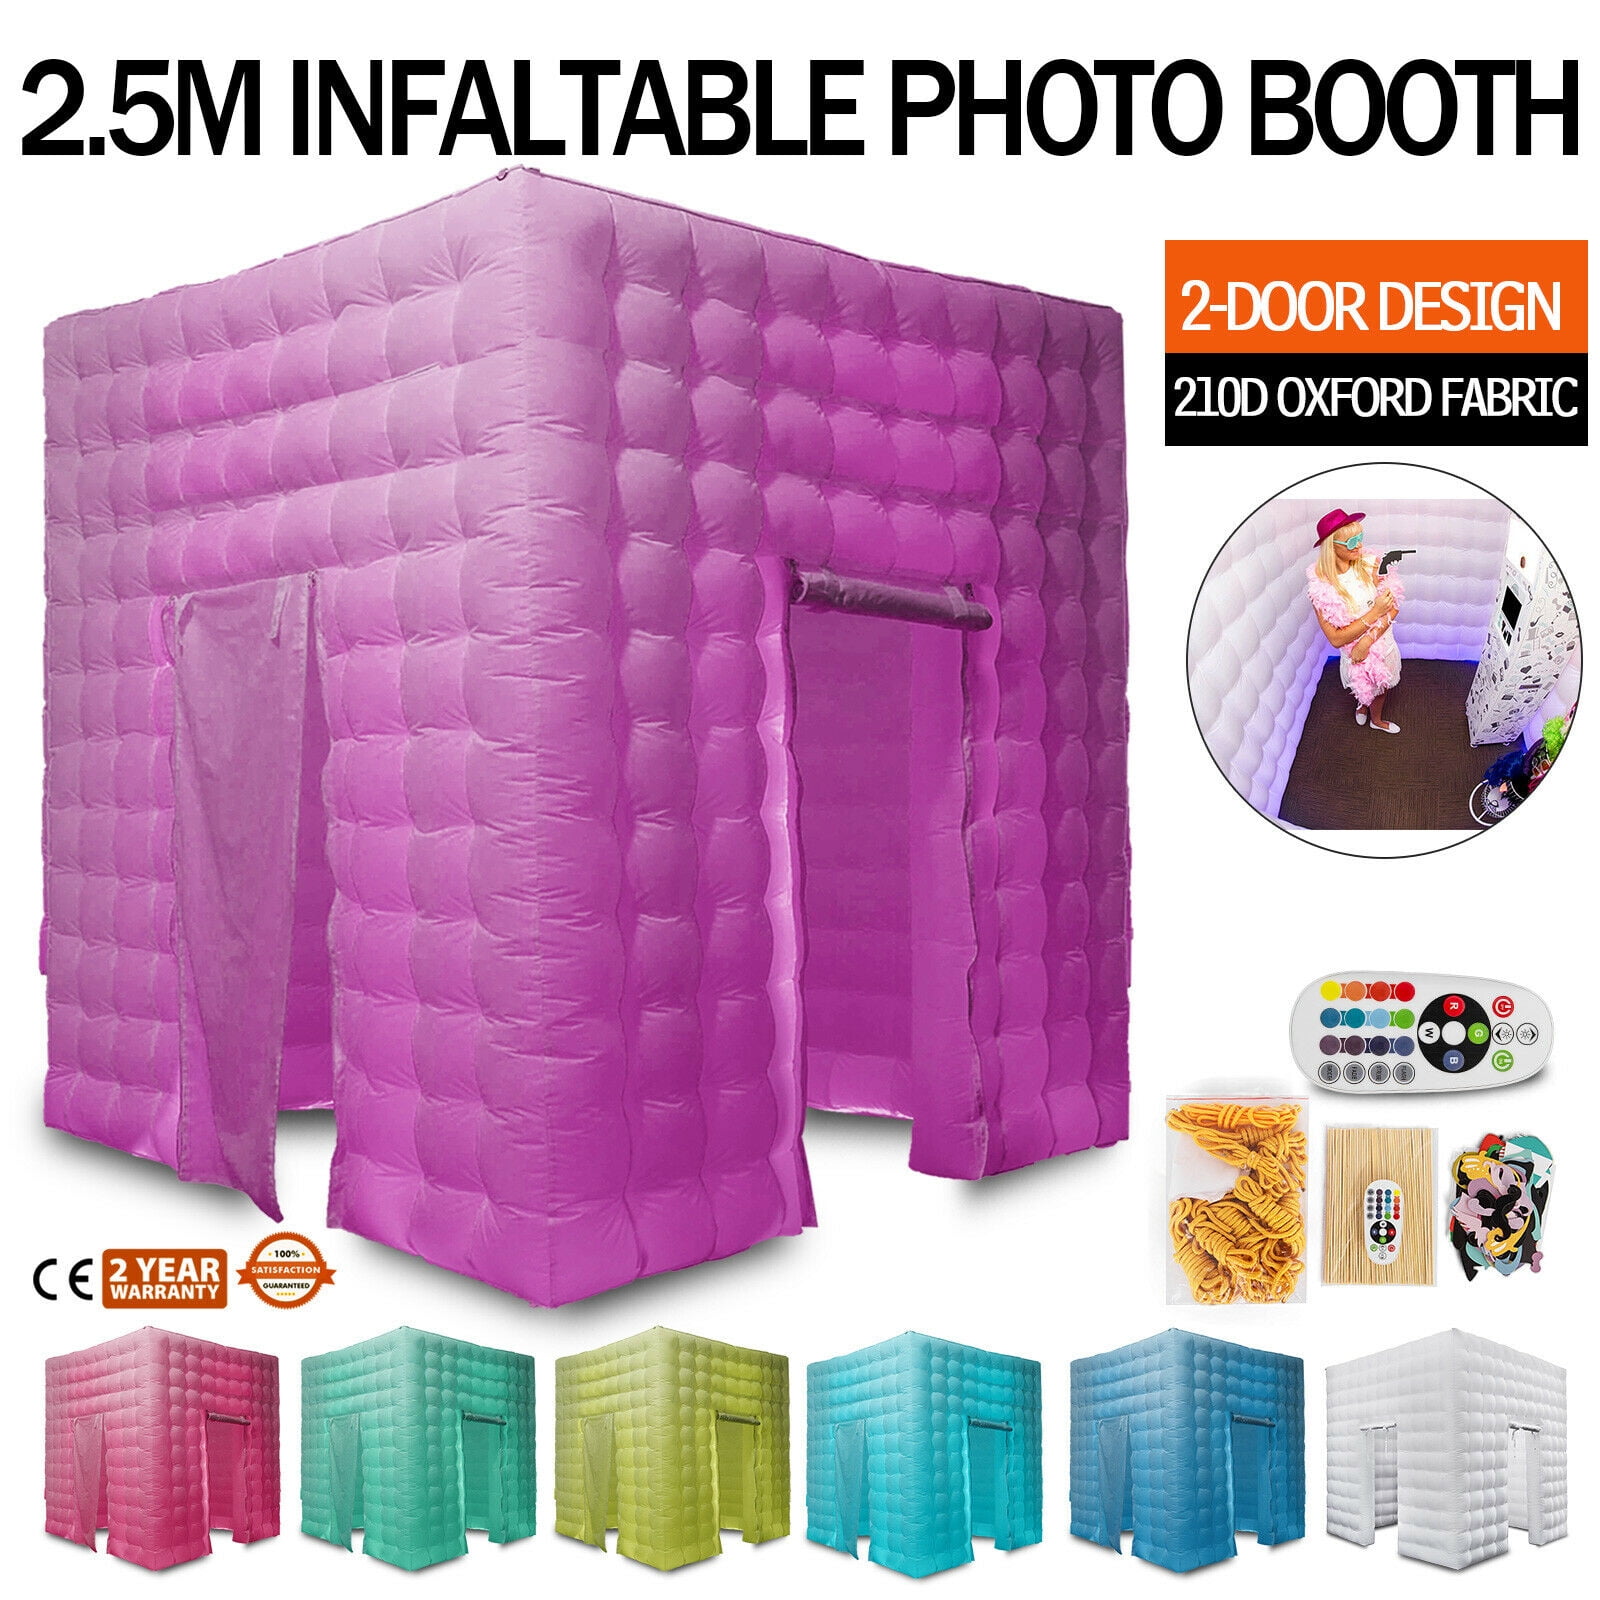 Inflatable Photo Booth Tent Party Spacious Colorful With LED Lights Air Pump 